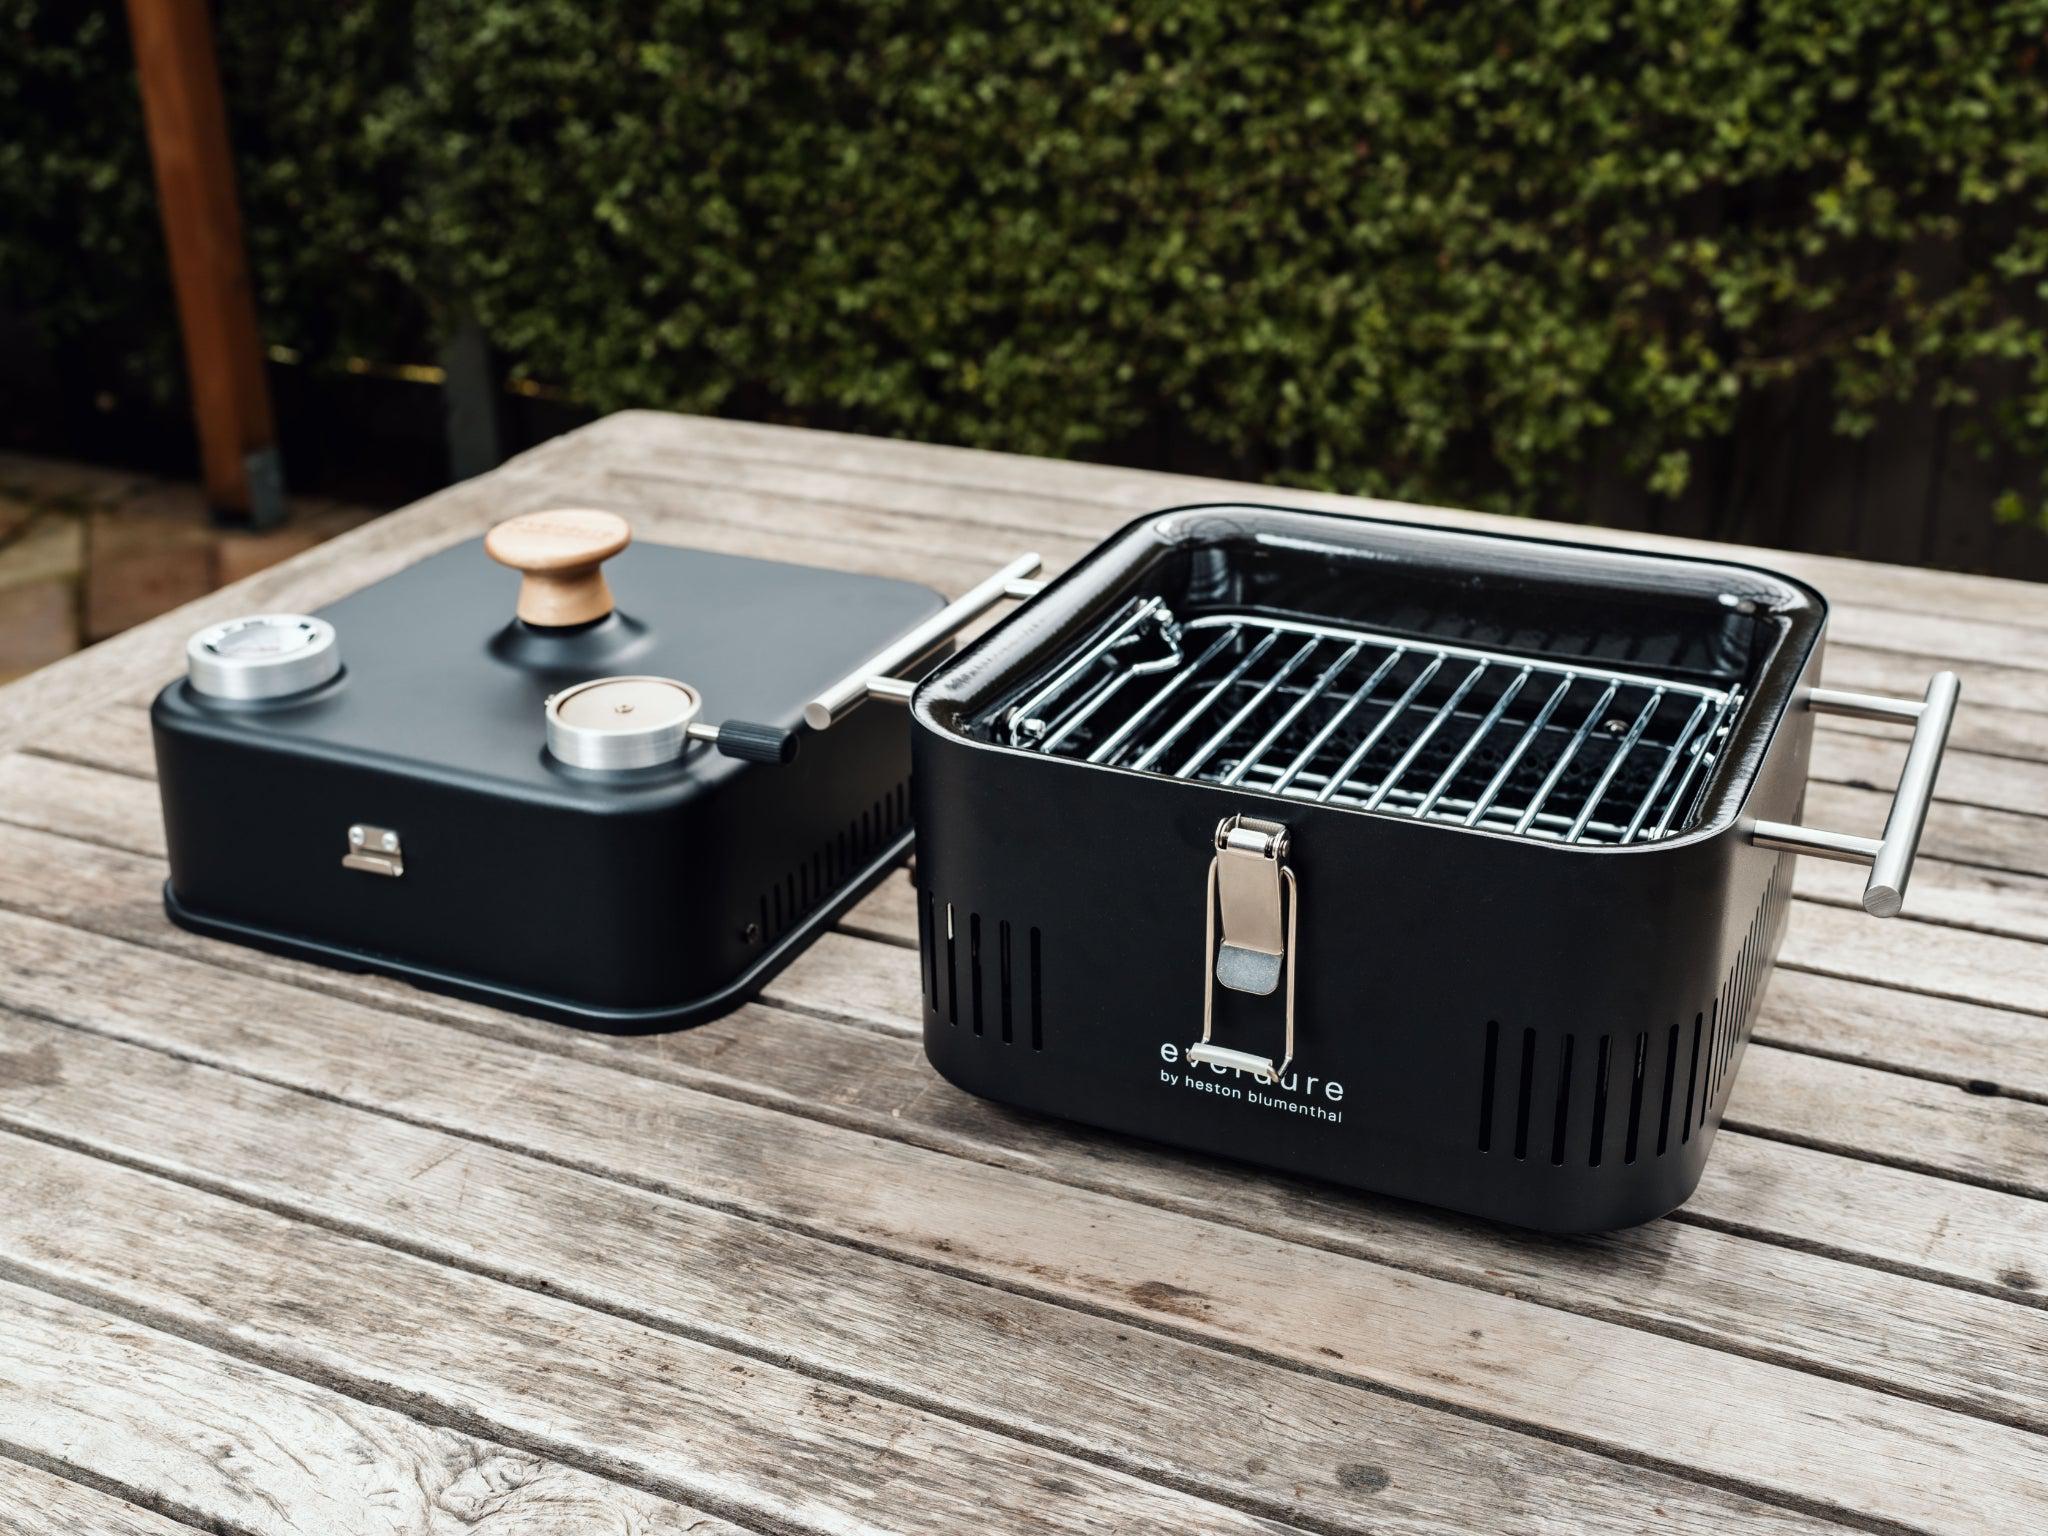 Everdure by Heston Blumenthal CUBE 360 Portable Charcoal BBQ